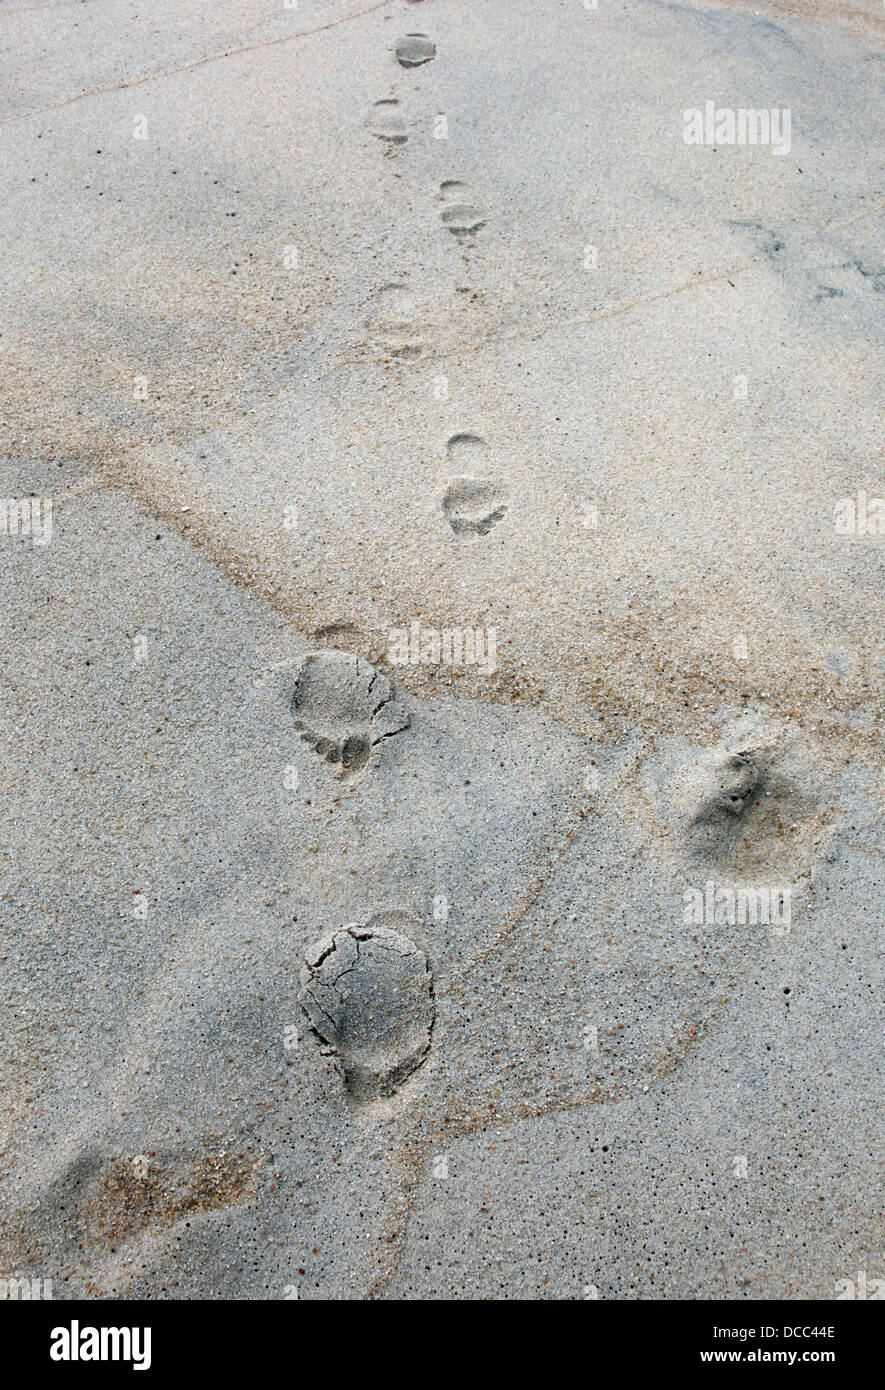 It's a photo of a footstep or footsteps on the sand on the beach near the sea. It's a right foot walking away Stock Photo